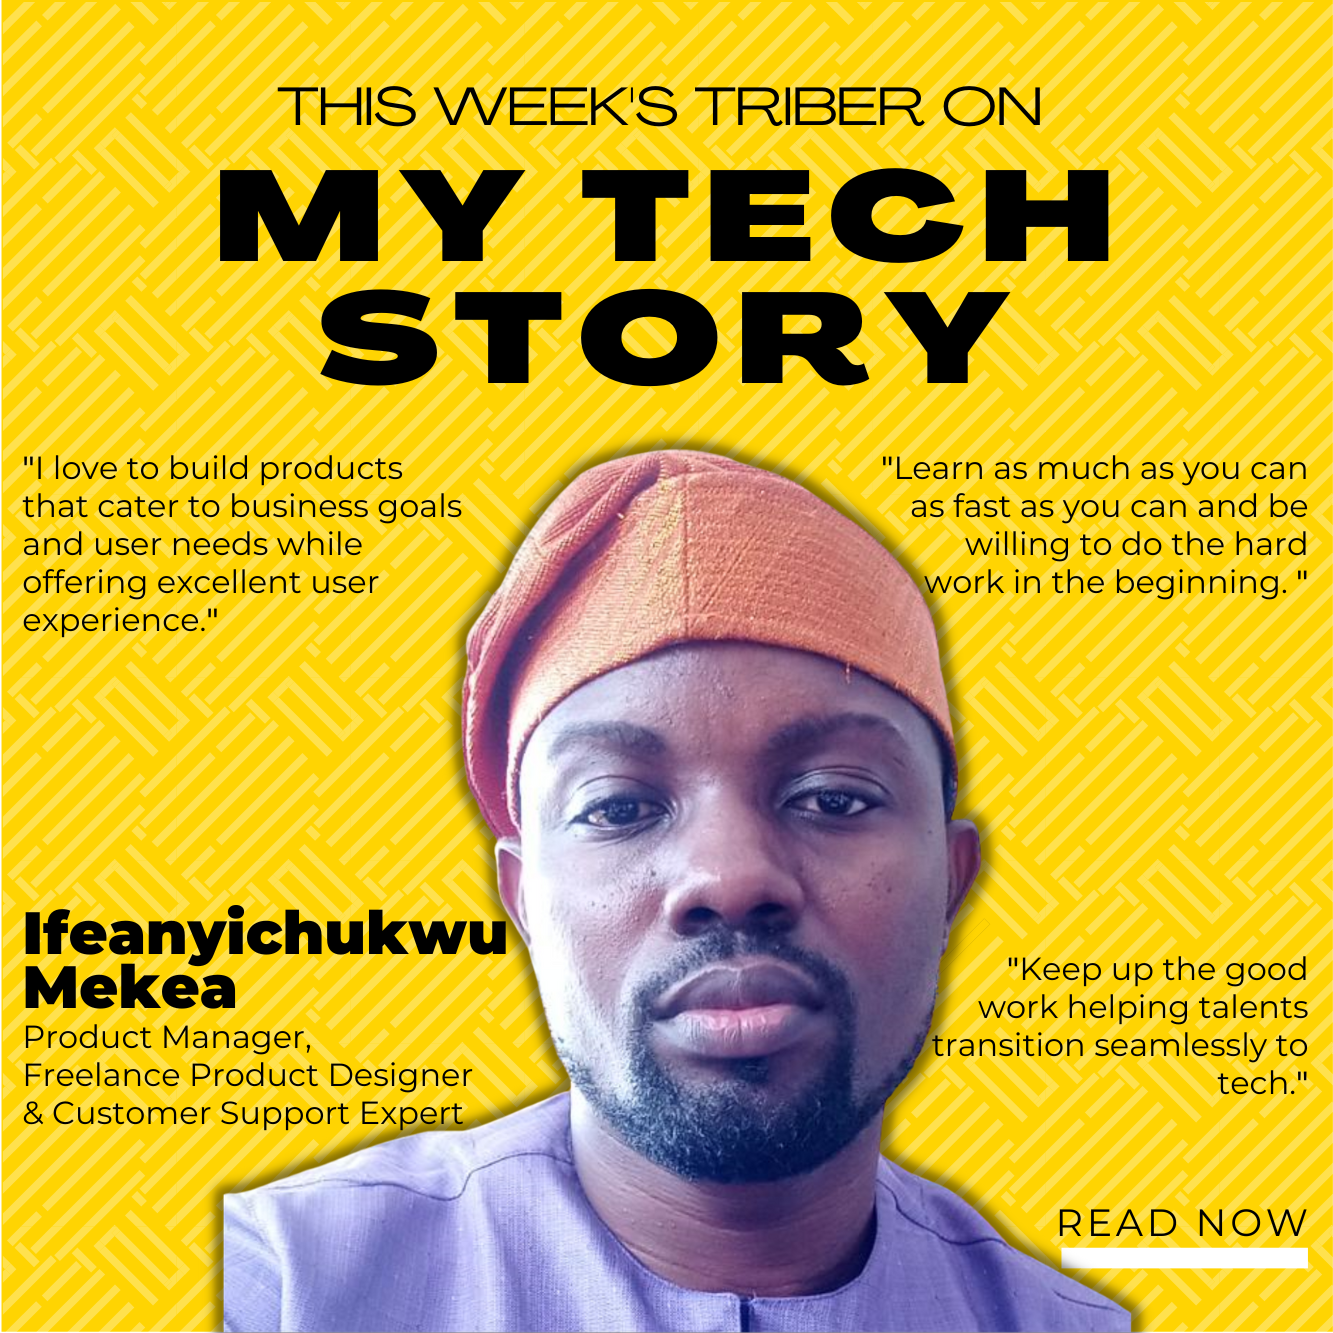 MyTechStory: Meet Ifeanyi, A Product Manager, Freelance Product Designer, and Customer Support Expert.